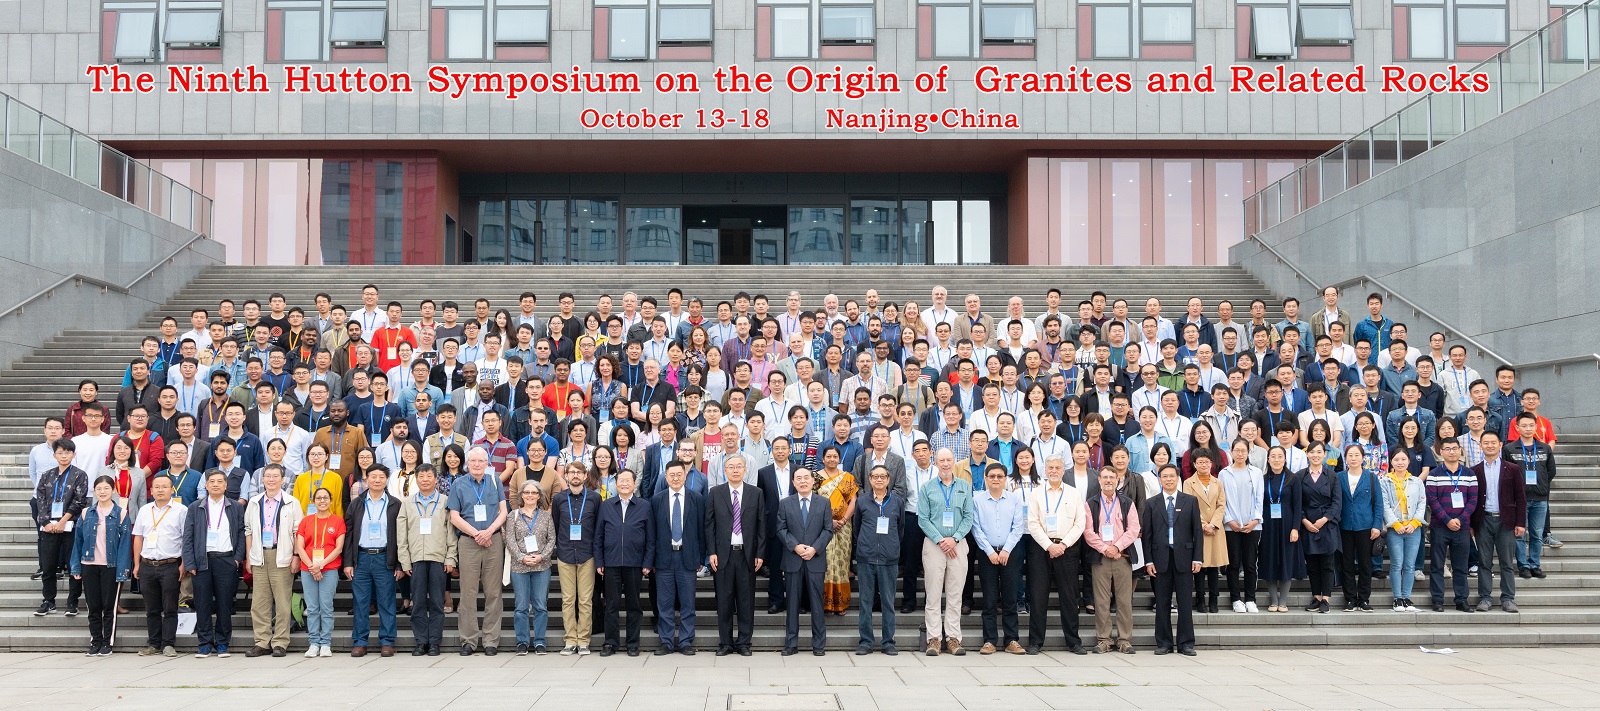 The opening ceremony of the 9th Hutton Symposium